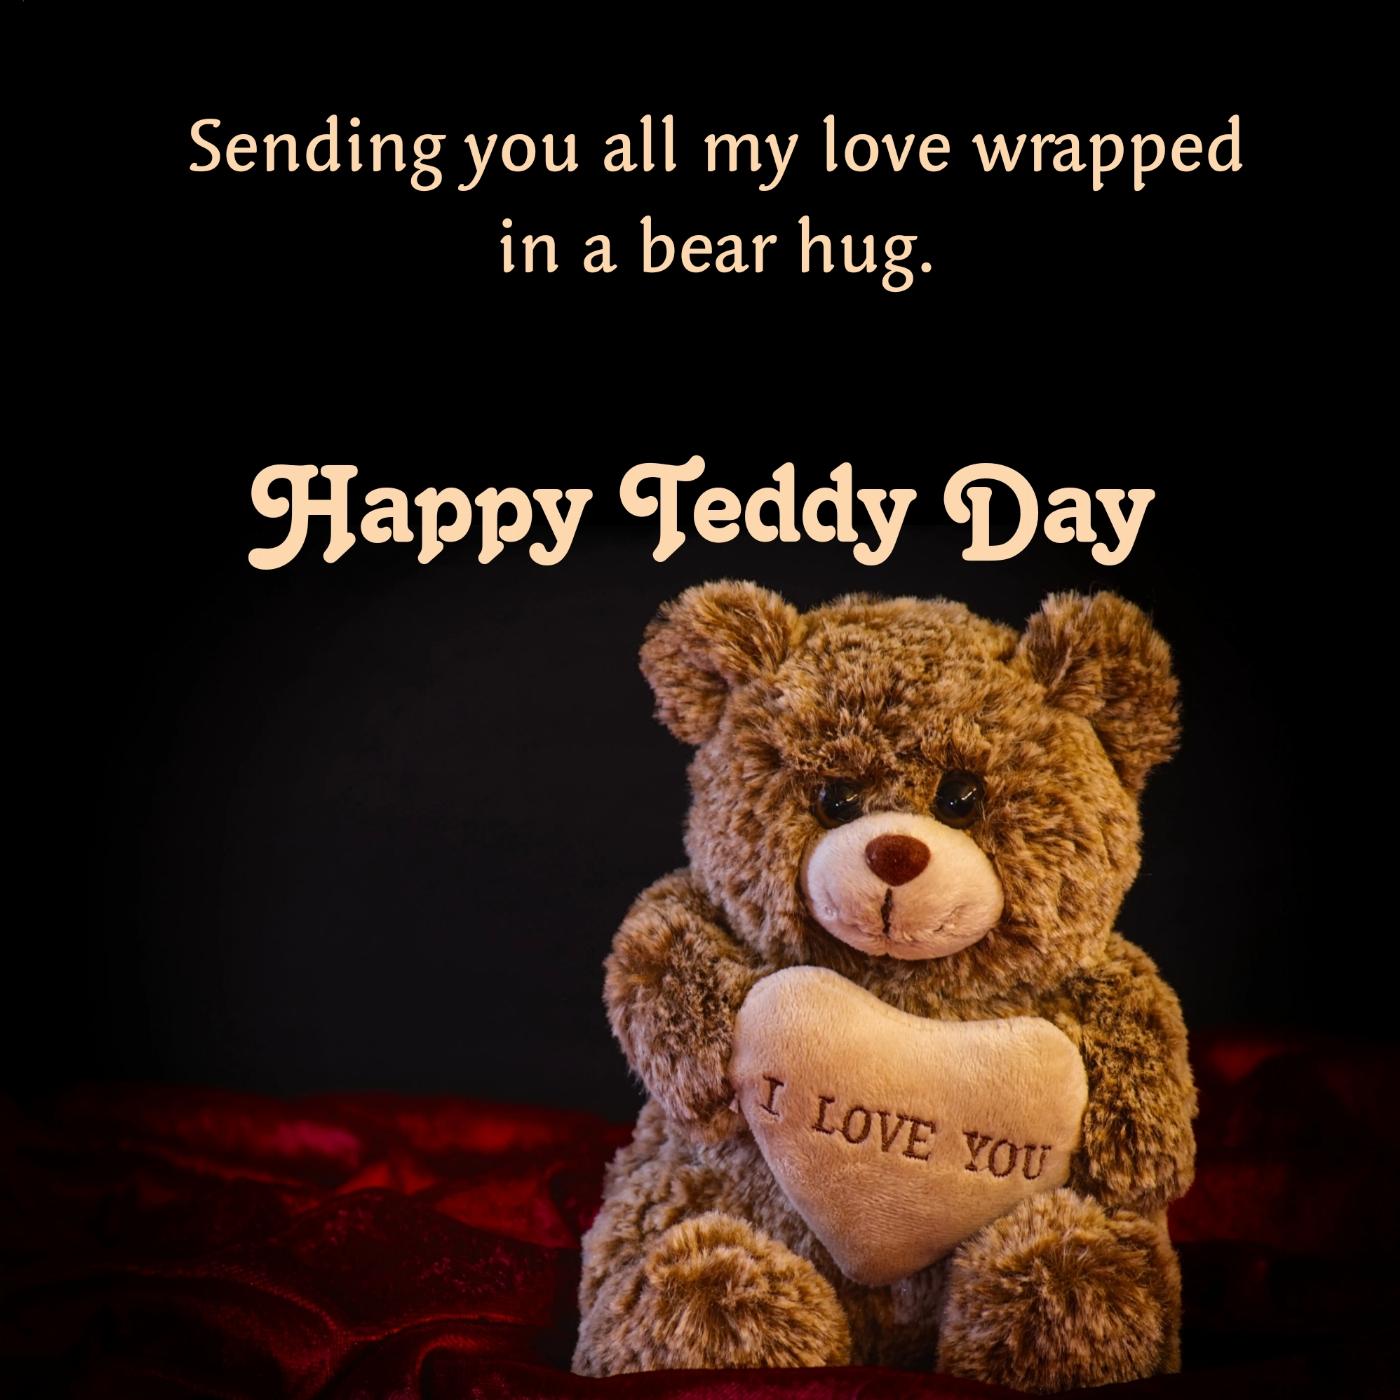 Sending you all my love wrapped in a bear hug